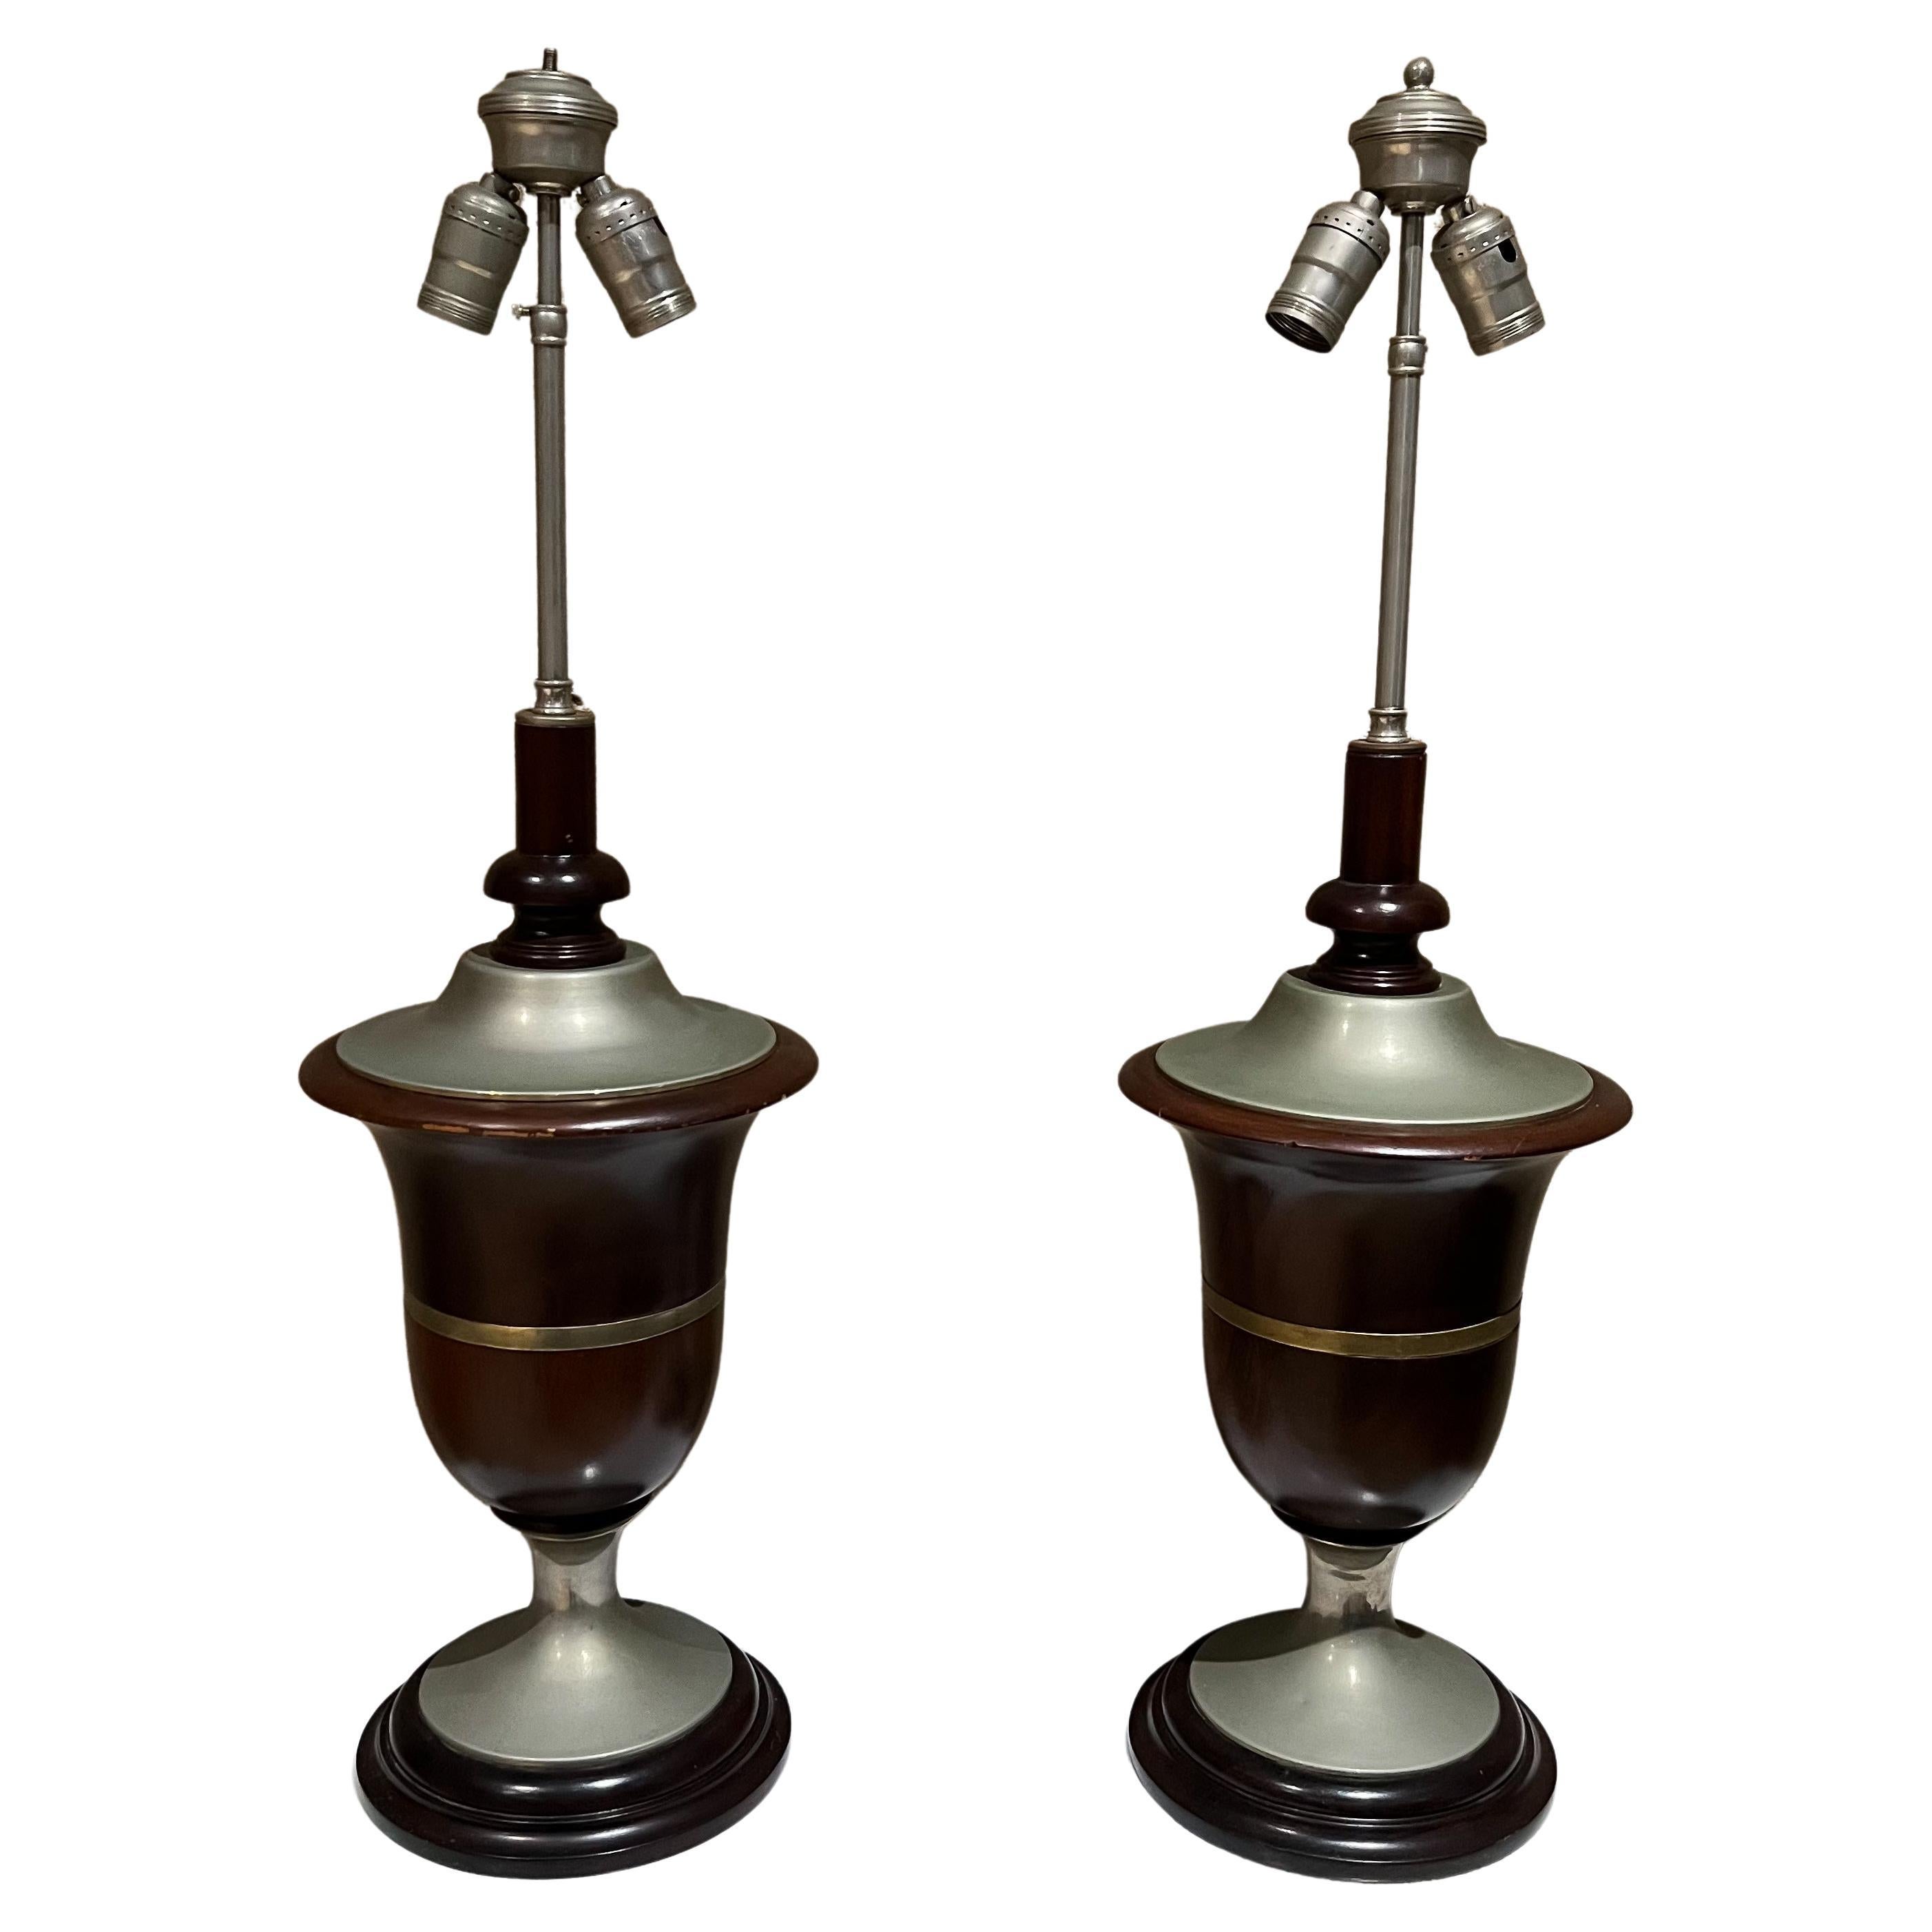 1940s Modernism Neoclassical Mexican Mahogany Table Lamps Style Luis Barragan For Sale